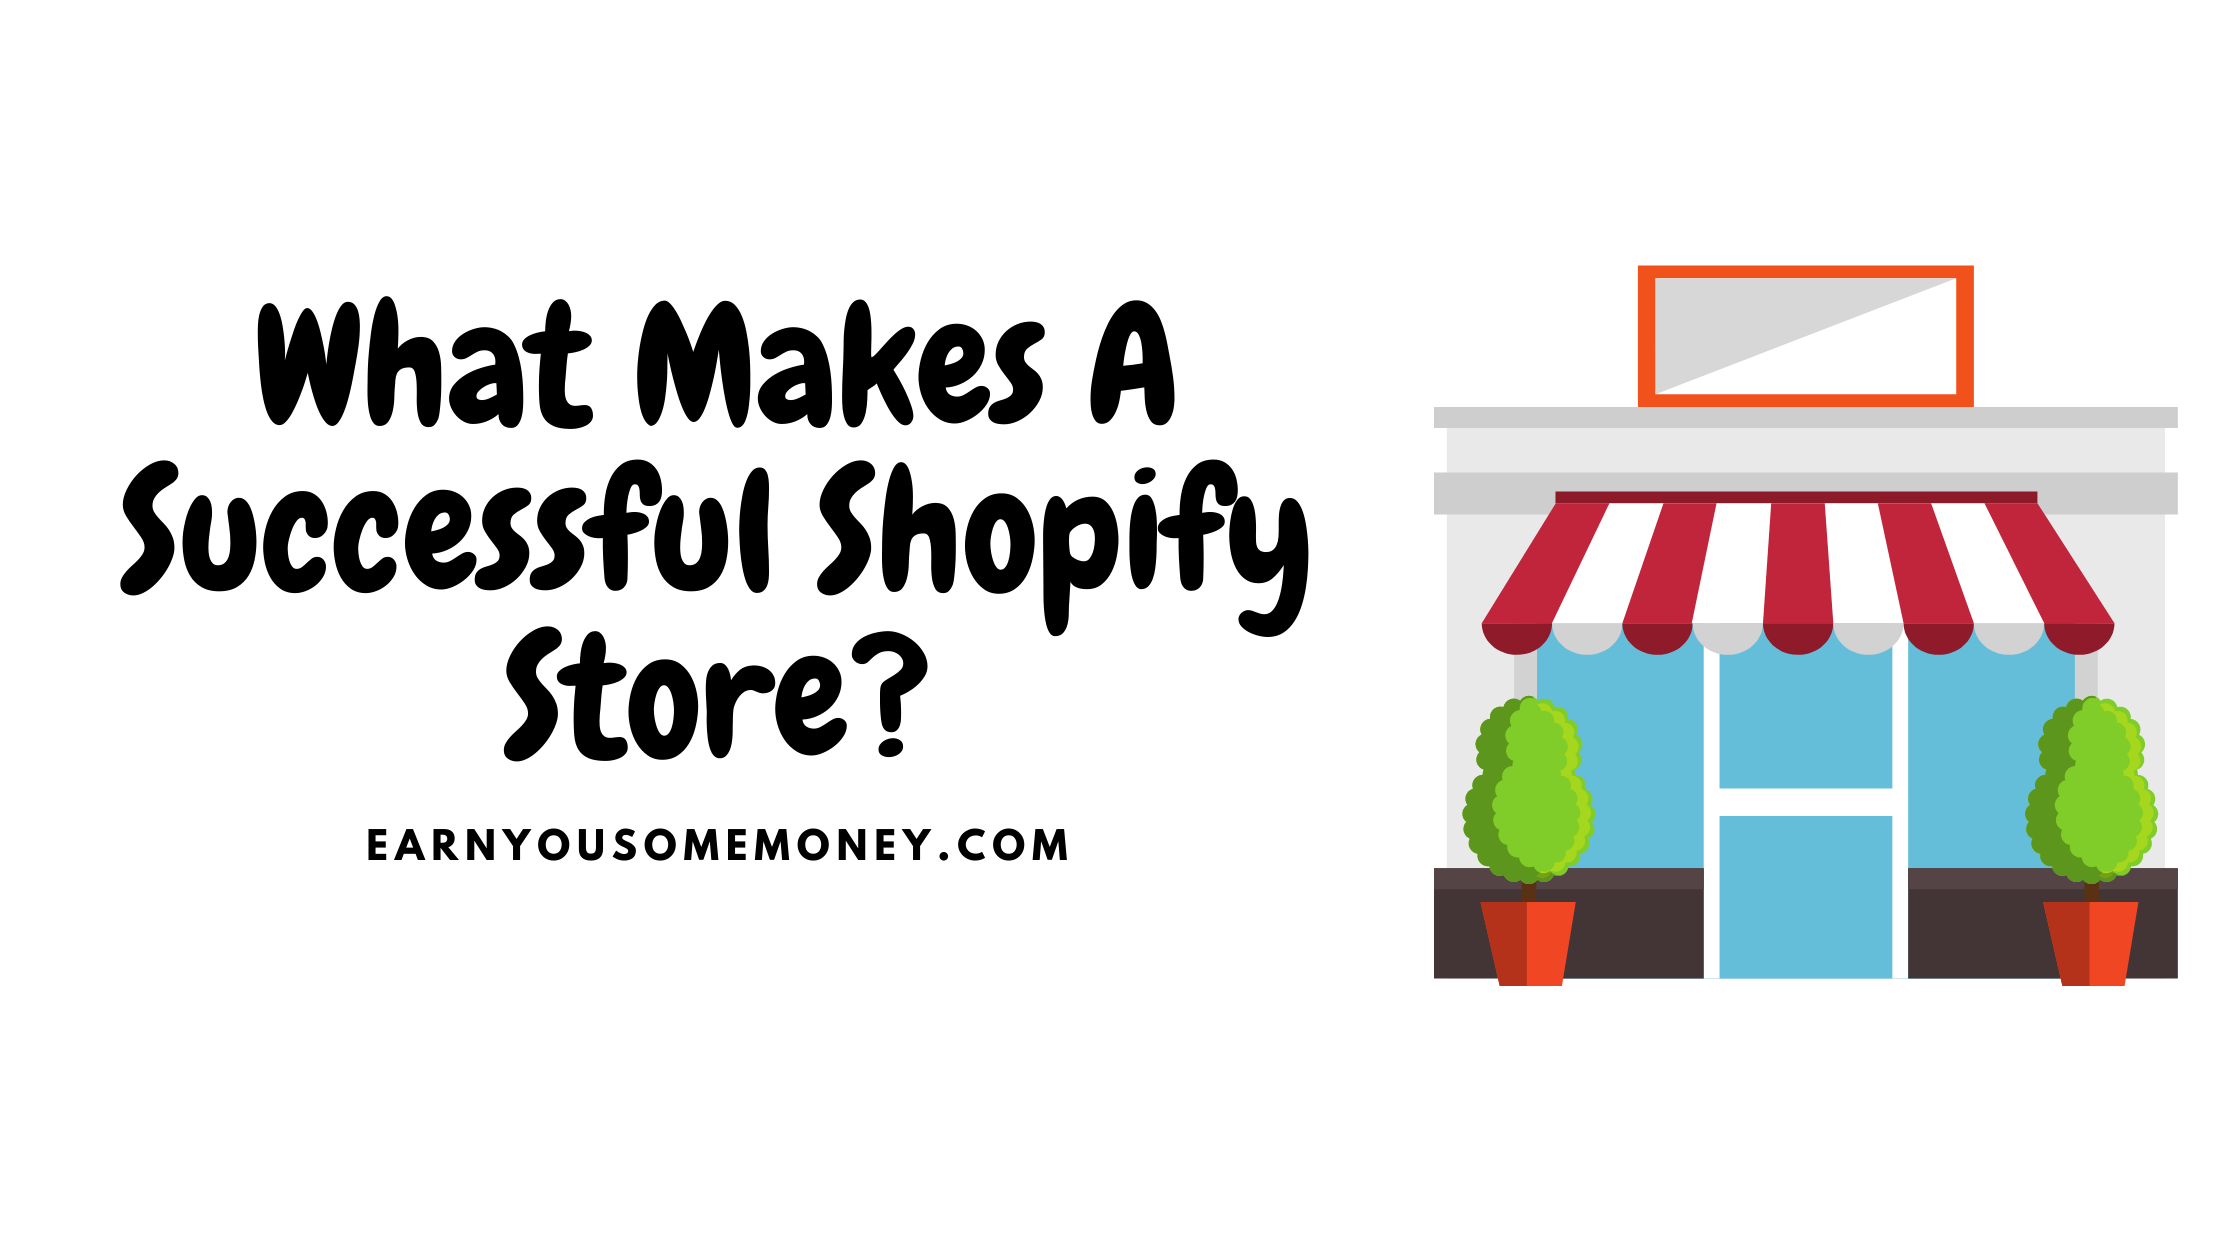 What Makes A Successful Shopify Store?